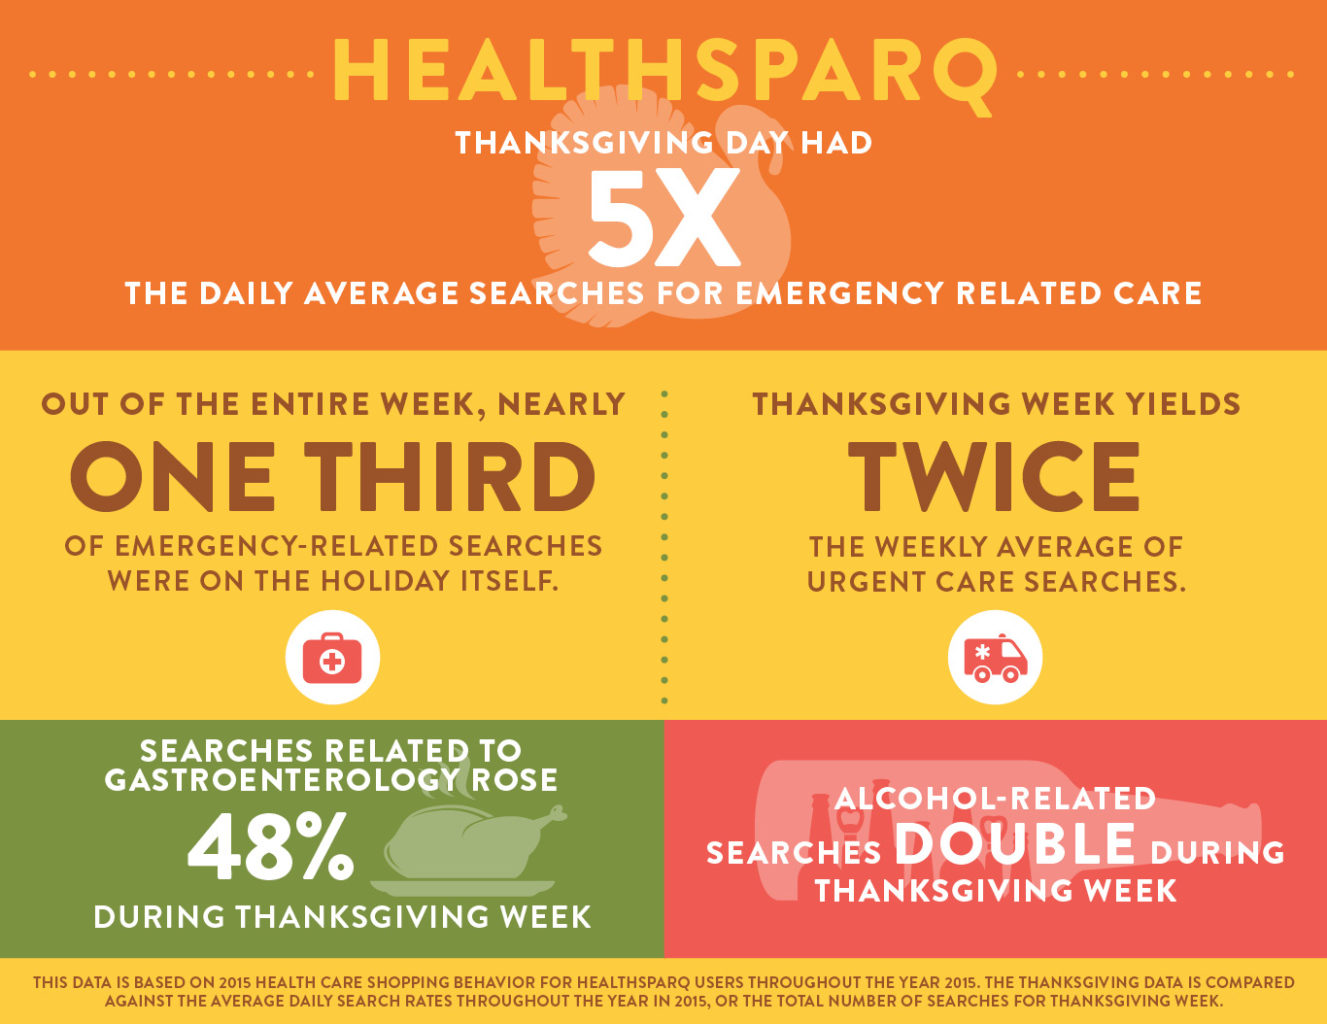 Emergency Care, Alcohol-Related Needs Are Hot Healthcare Searches on Thanksgiving